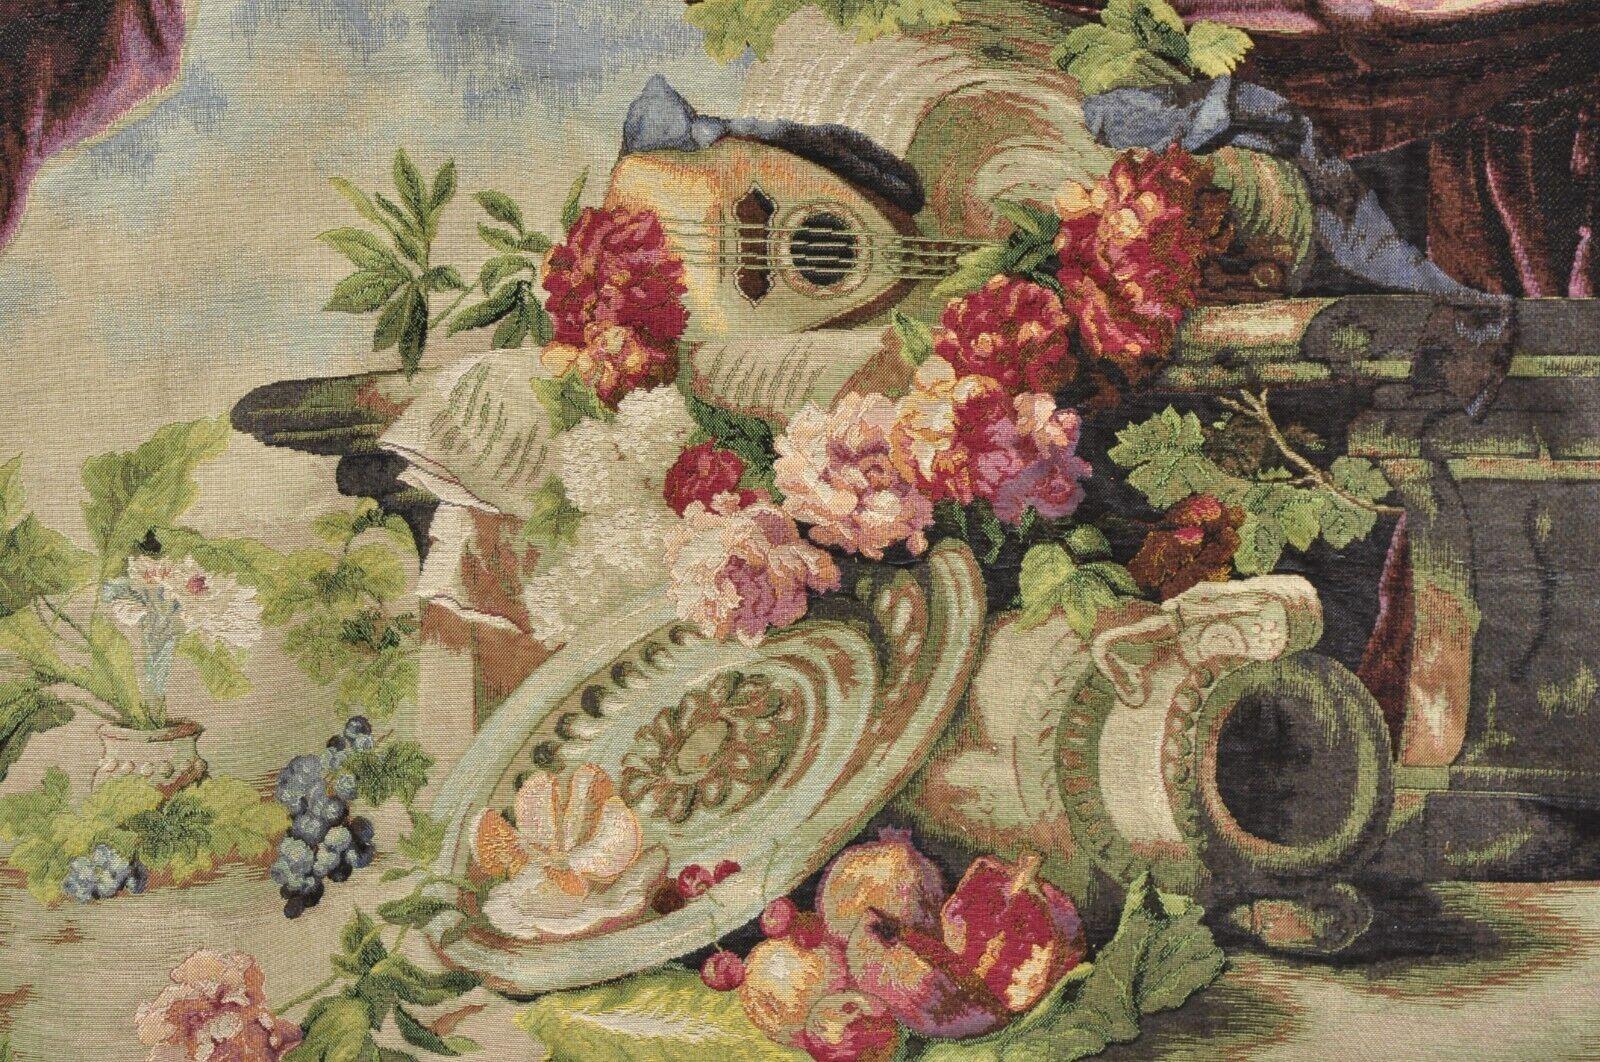 Jacquard Woven French Wall Tapestry Still Life Flowers & Mandolin by J&D In Good Condition For Sale In Philadelphia, PA